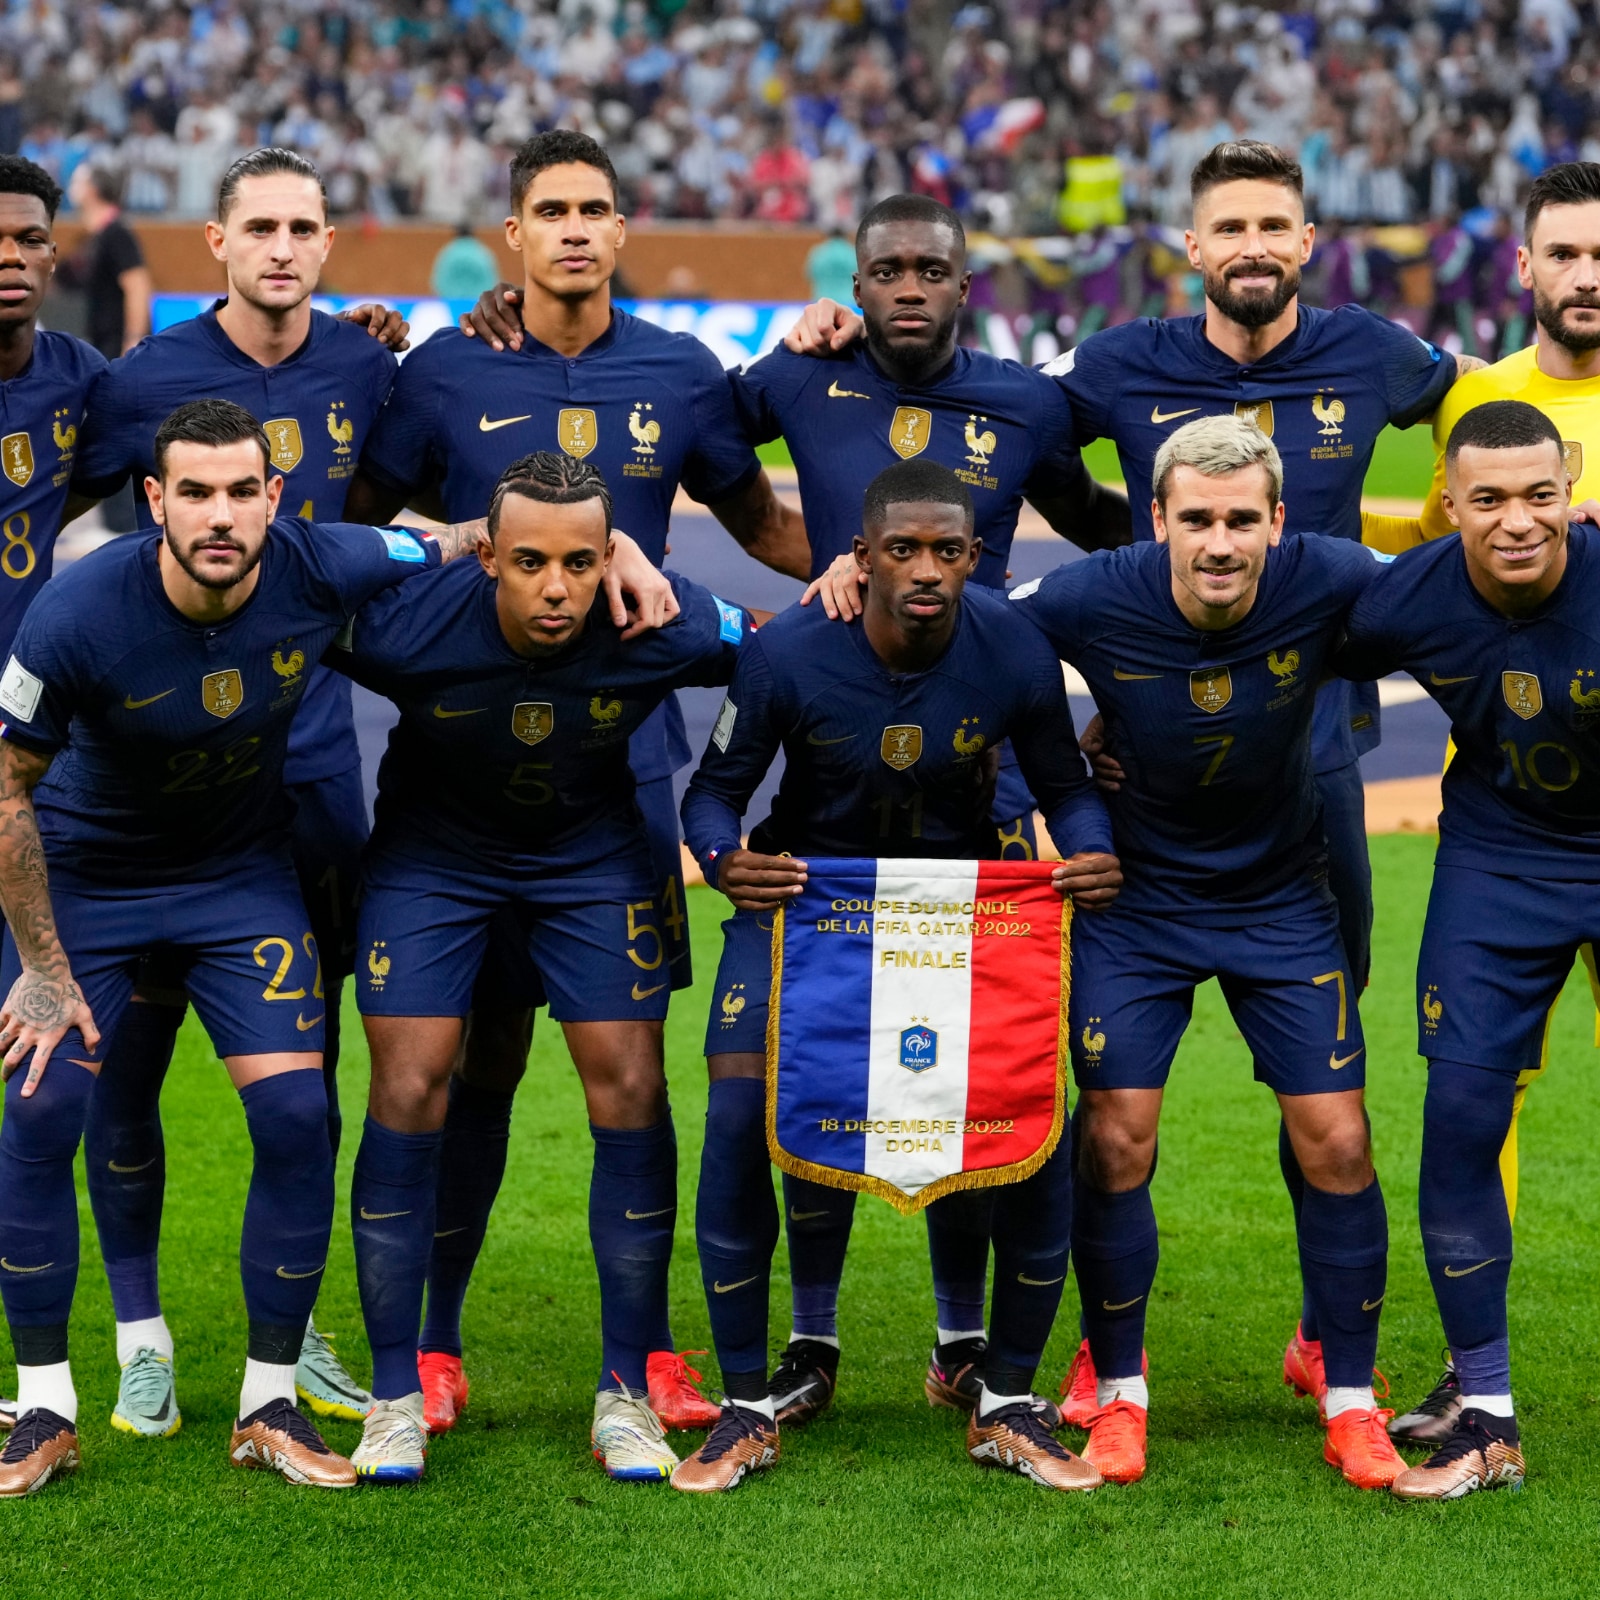 Runner-ups France Fly Out of Qatar as FIFA Acclaims World Cup Attendance